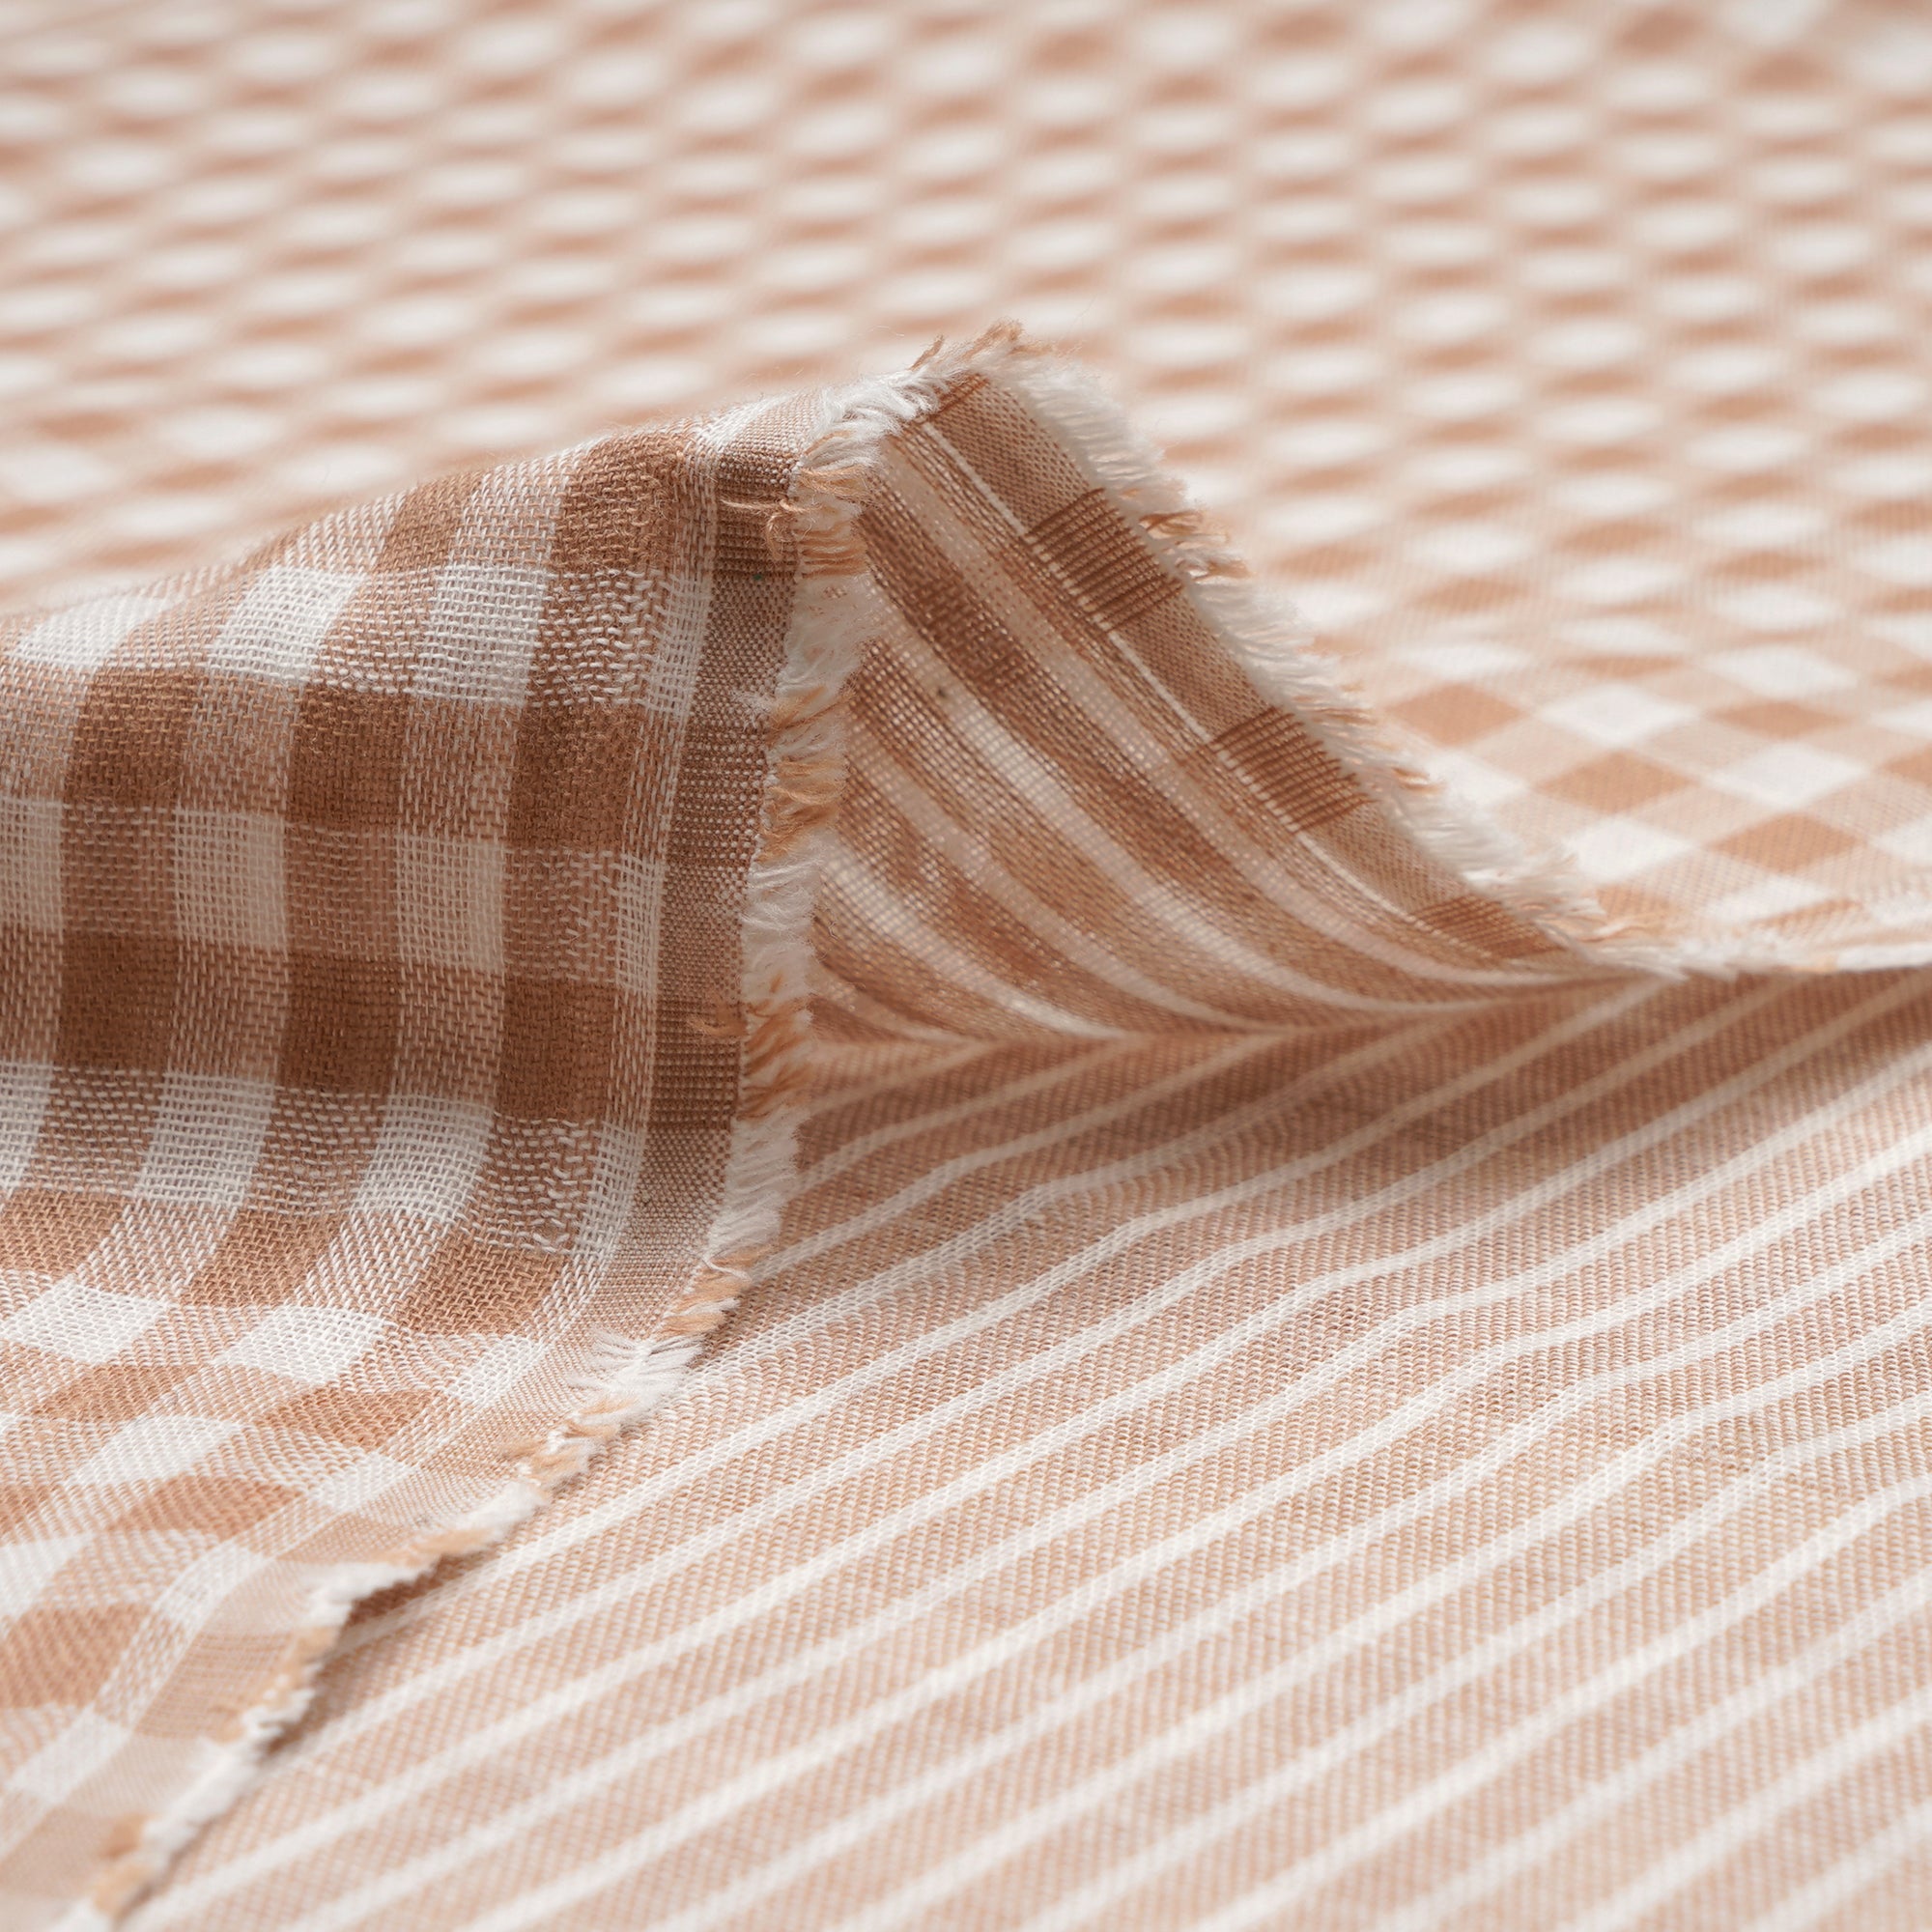 Maple Sugar Check Pattern Loom Textured South Cotton Double Cloth Fabric